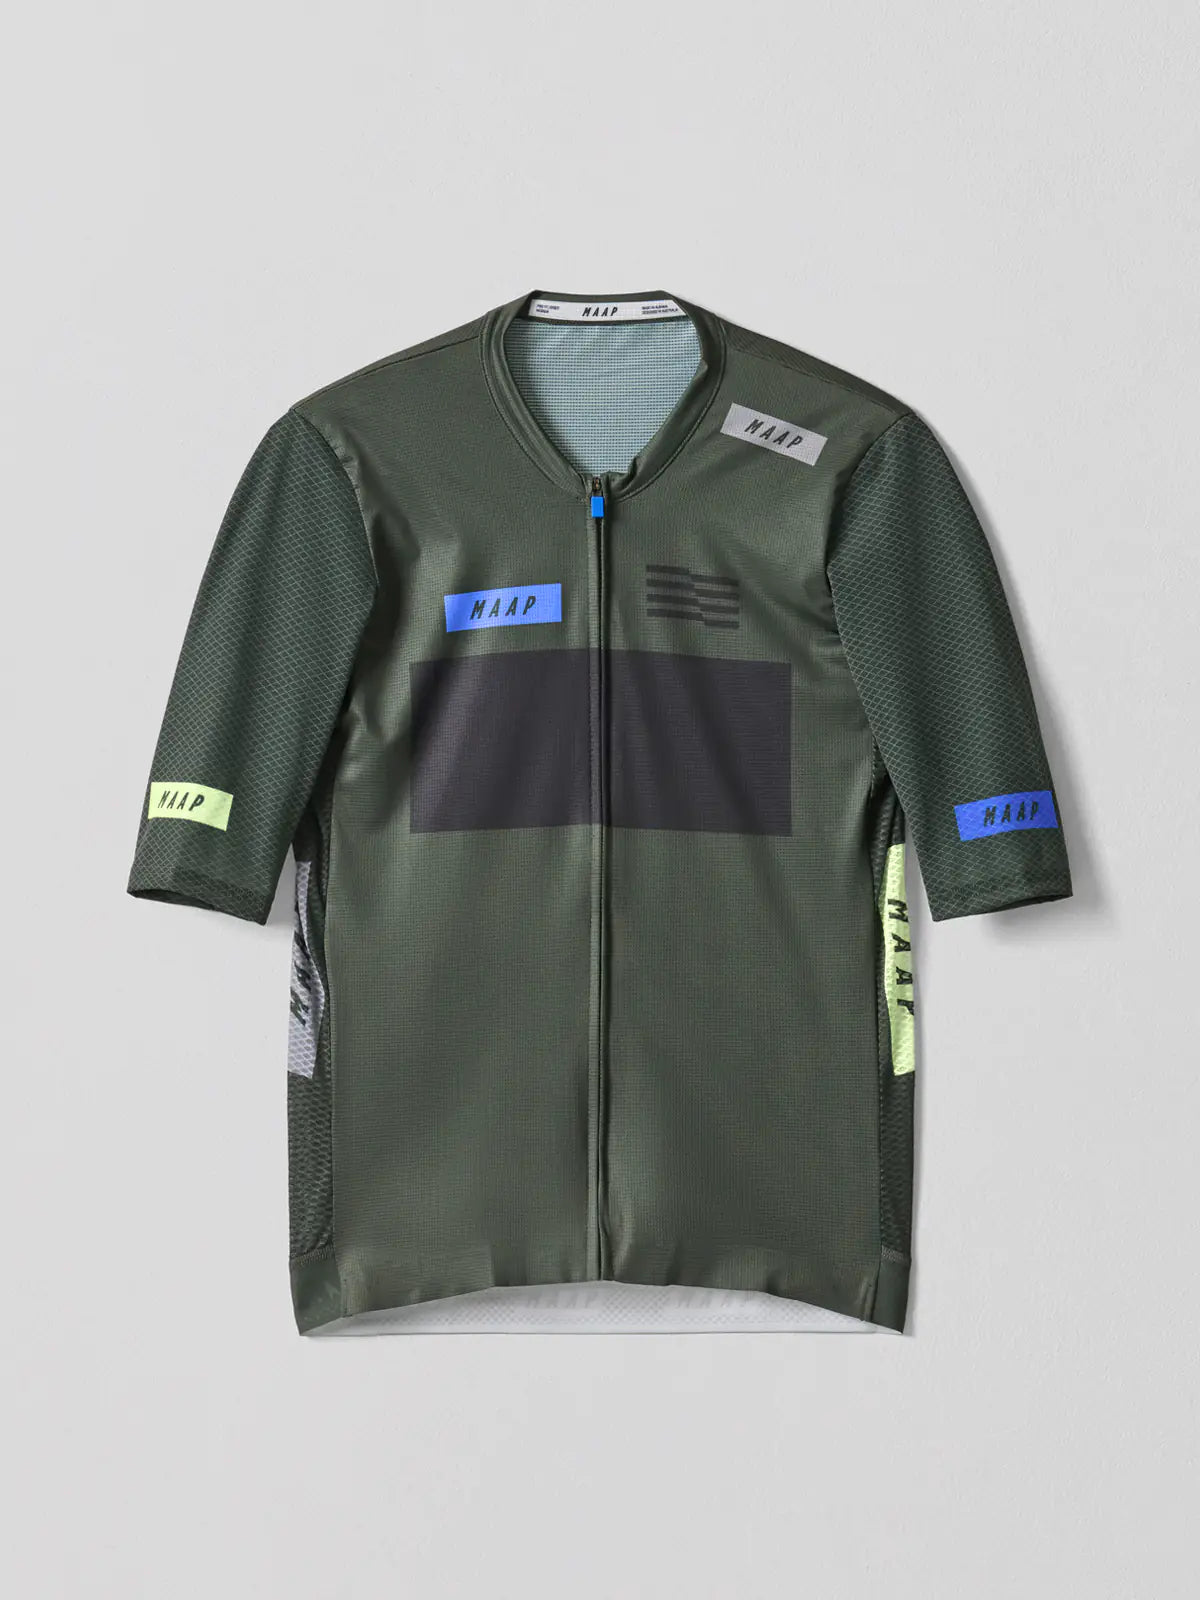 MAAP System Pro Air Jersey Bronze Green メンズ サイクルジャージ | CYCLISM